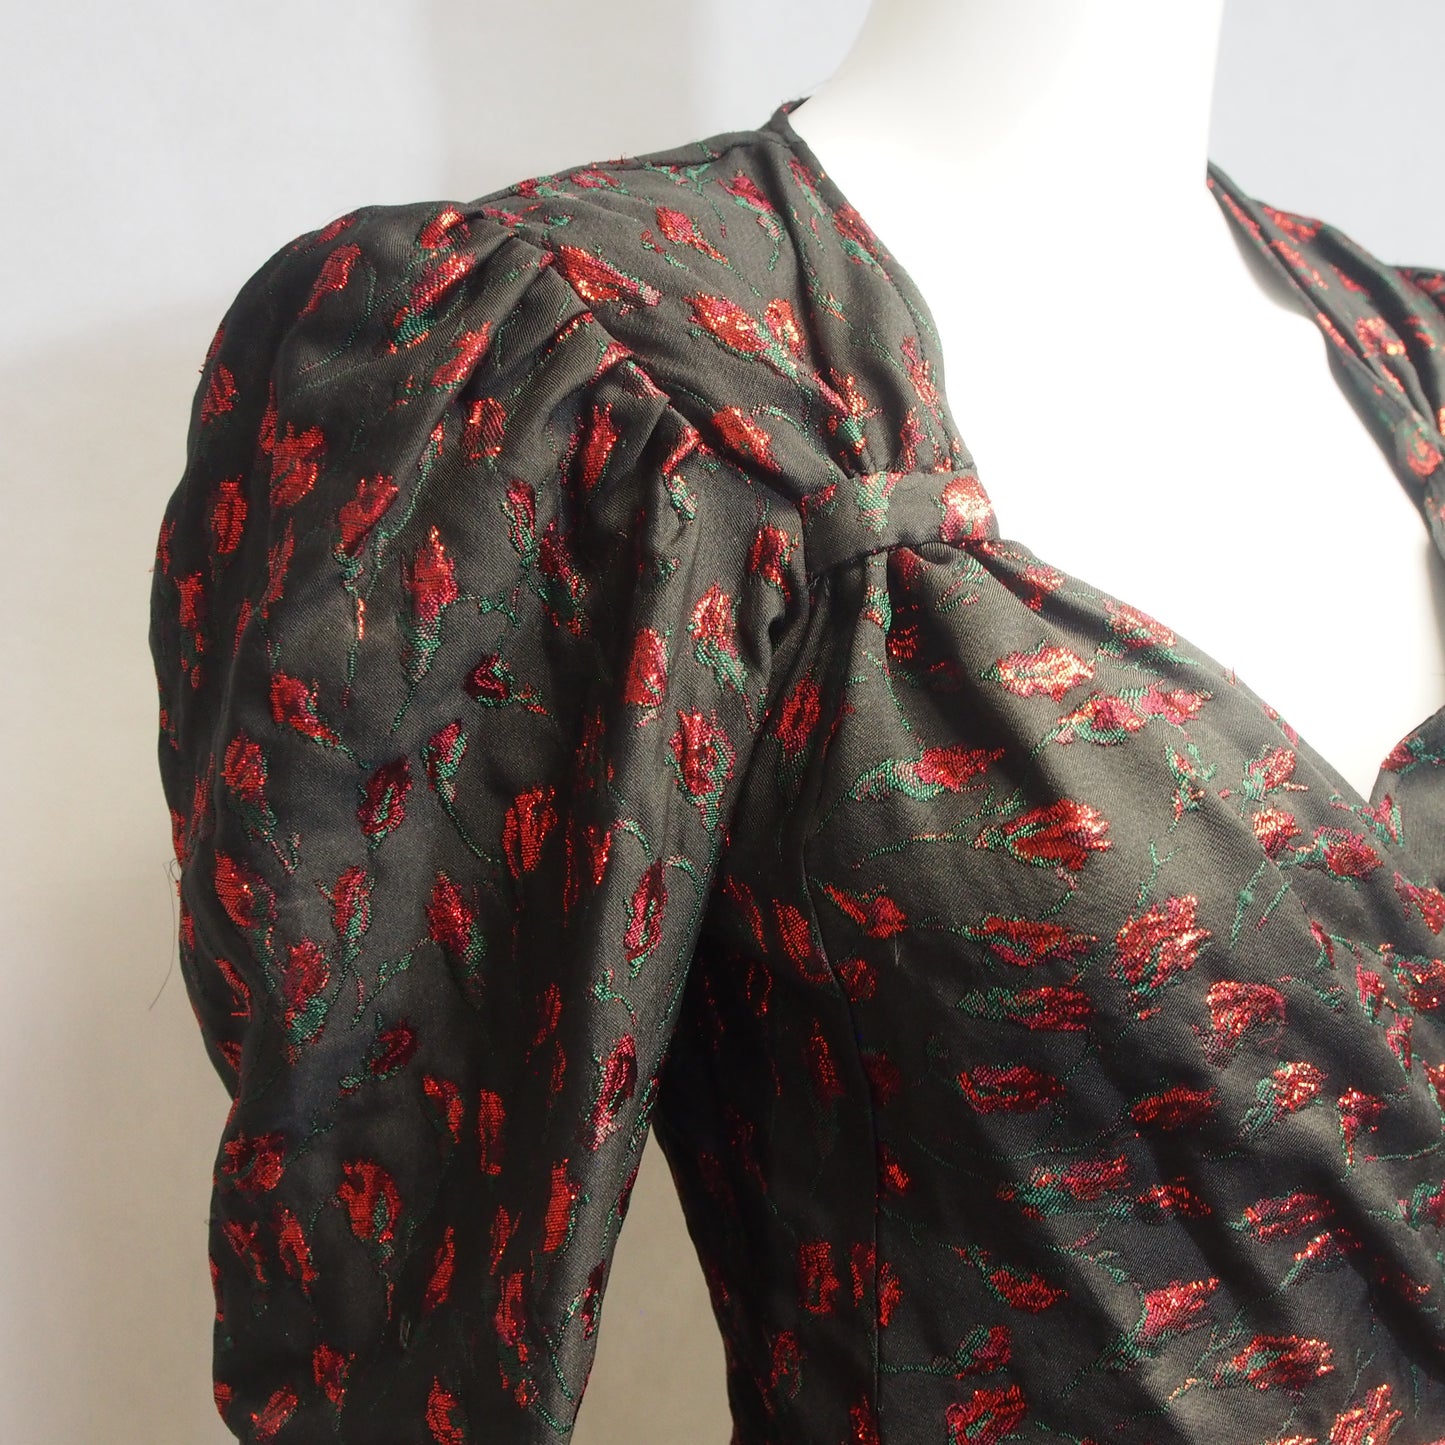 THE ATTICO BLACK AND RED FLORAL PATTERNED WRAP DRESS - SIZE 40 uk 8